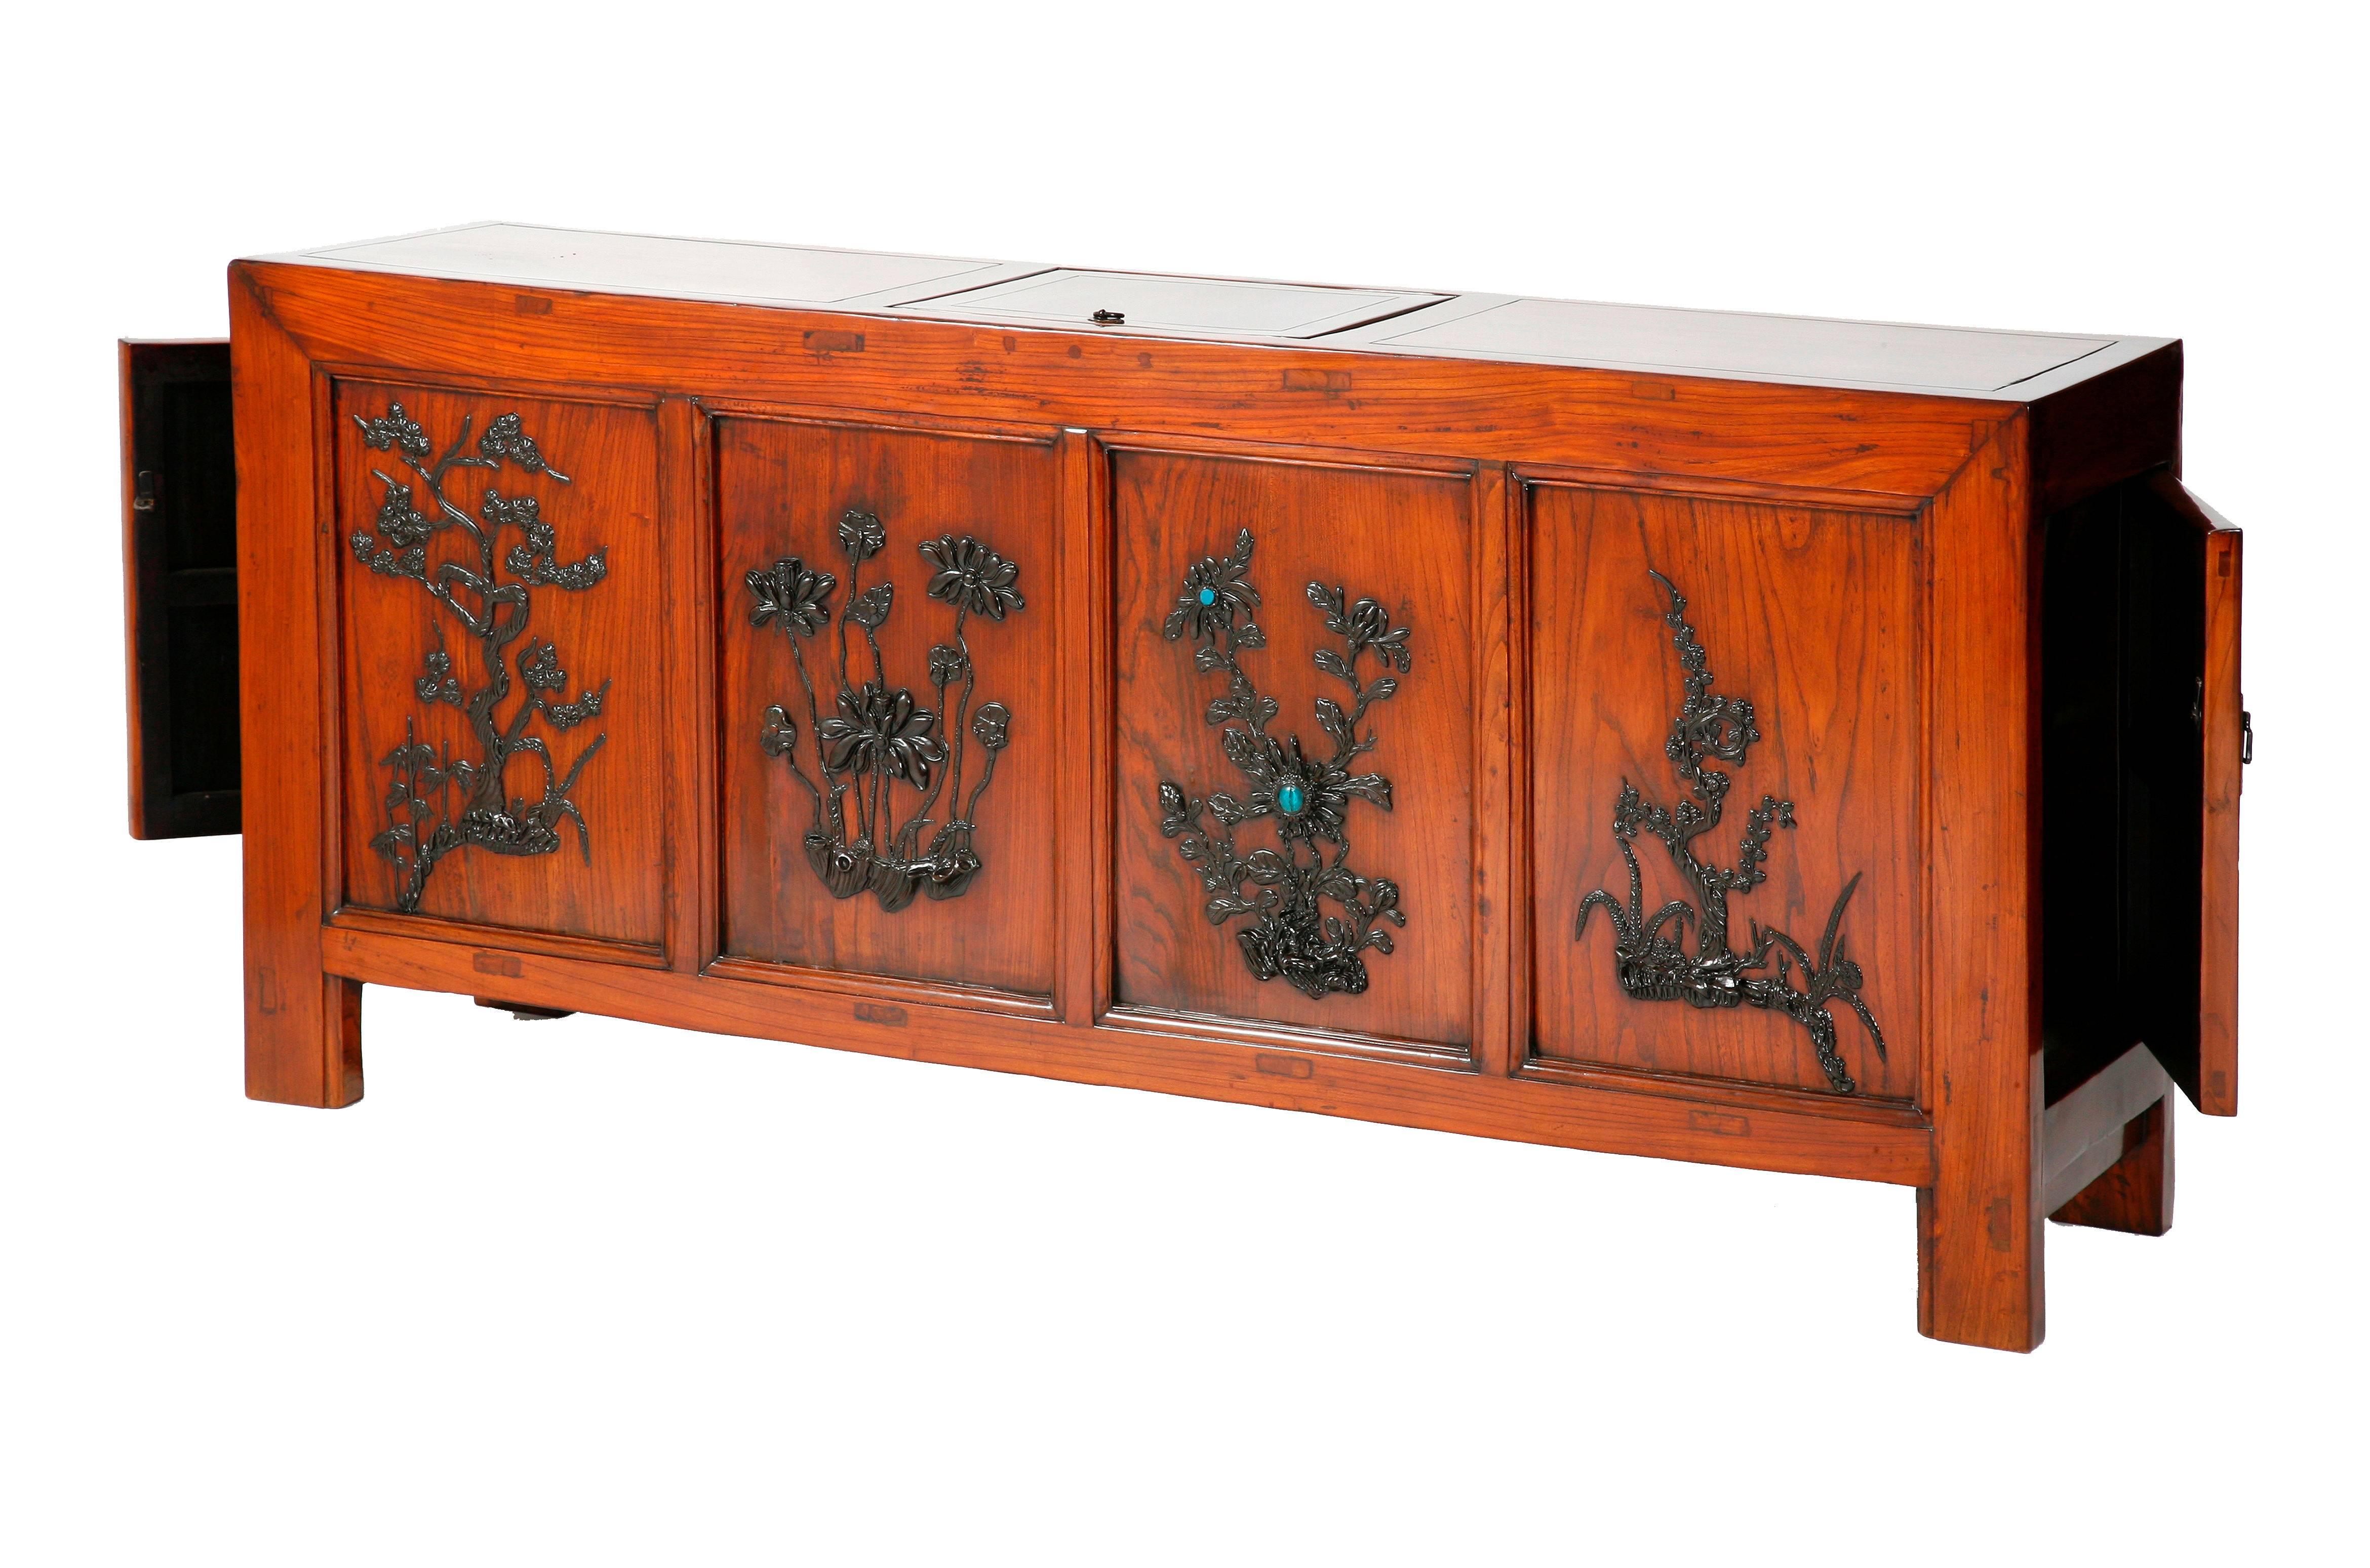 The unique square corner coffer with a lift top and doors on both sides for accessing to the storage spaces, rectangular-sectioned frame members carved with molding, the front panels inlaid with ebony carvings of pine, lotus, chrysanthemum with